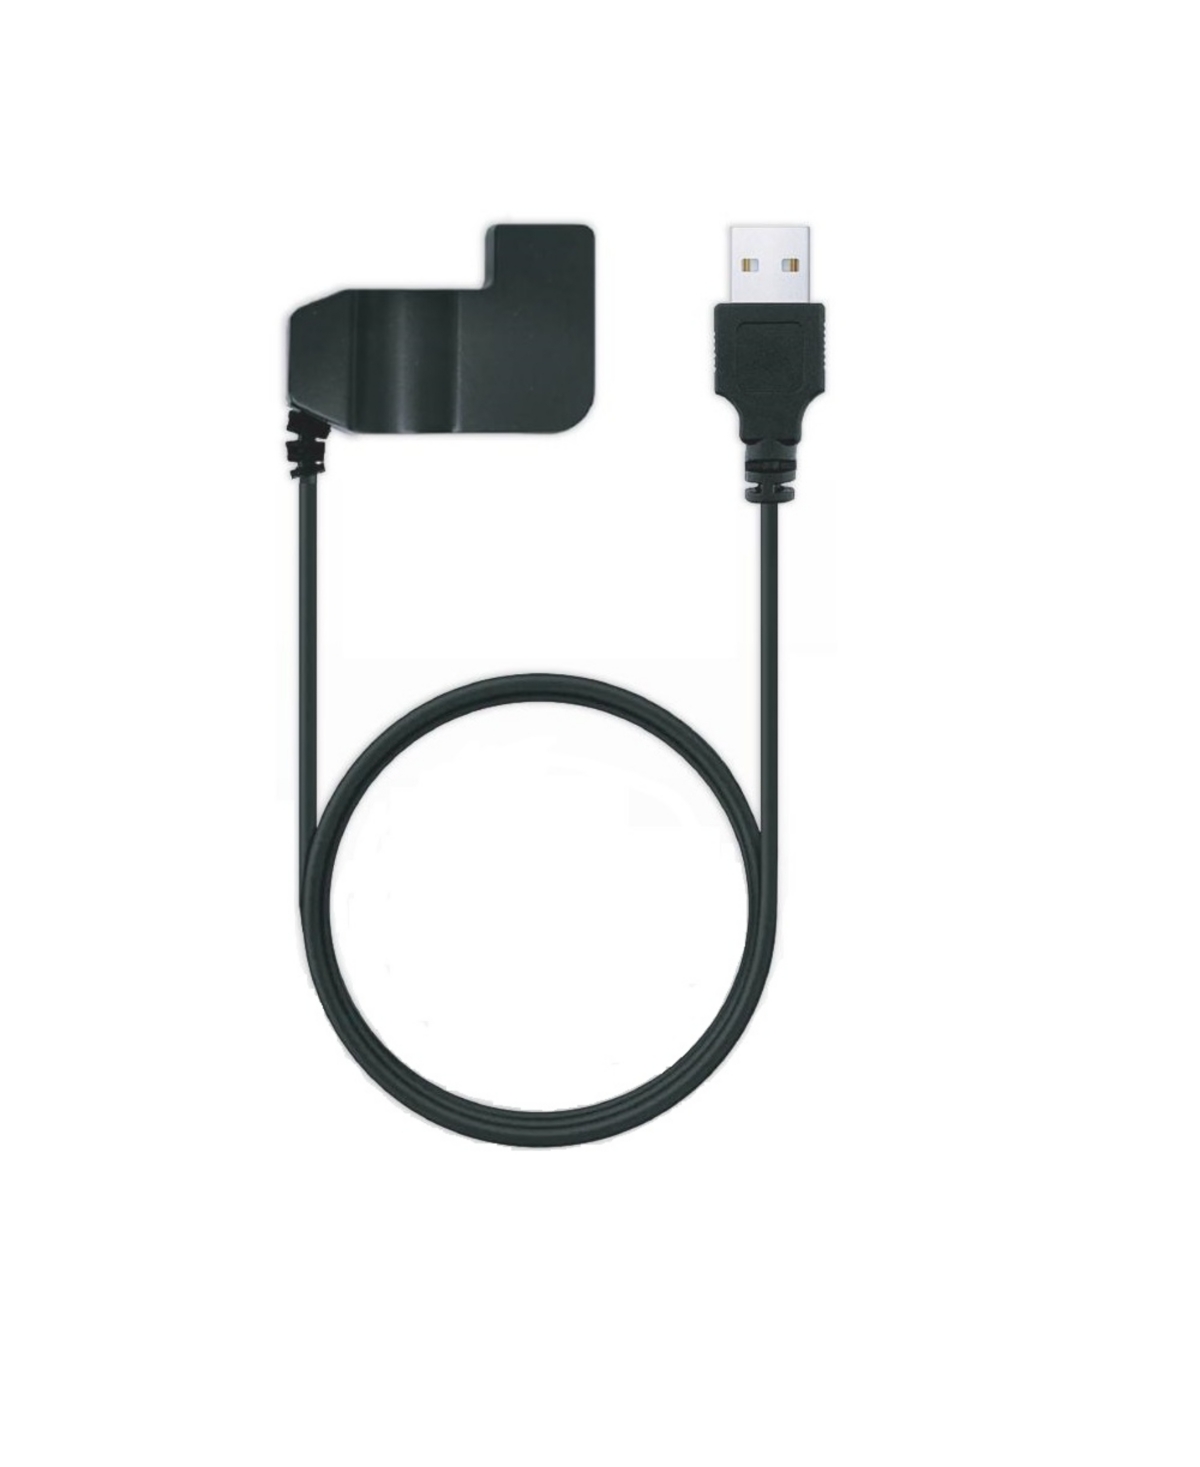 Active Fitness Tracker Replacement Usb Charger Cable - Black